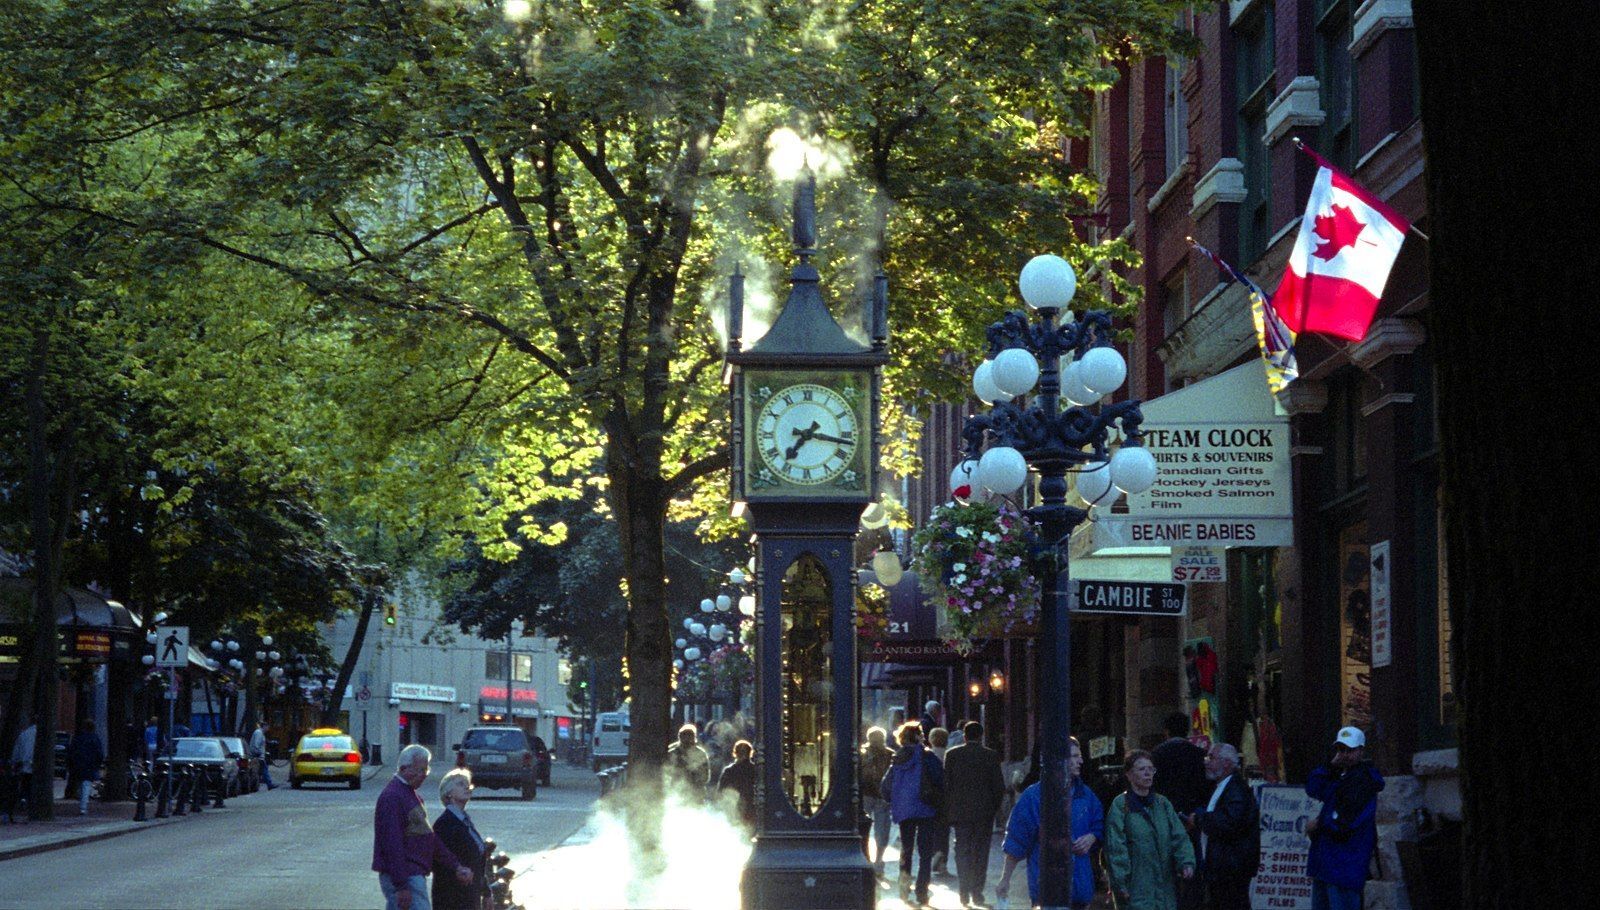 <p>A stroll through Vancouver’s historic Gastown wouldn’t be complete without a visit to the <a href="https://commons.bcit.ca/evolution1079/2022/05/10/gastowns-jewel-the-gastown-steam-clock/">Steam Clock</a>. Treating tourists, including the cruise ship crowds, to a whistle and steam show every 15 minutes, this tourist attraction is a charmer. While it’s among the six working steam clocks around the world, it lacks the historical significance of an iconic landmark. In the 1970s, this steam clock was actually built to deter unhoused people from sleeping on the warm grates it stands on in the winter months. Resembling New York or Toronto’s Flat Iron buildings, Hotel Europe in Gastown might be an alternative, as this heritage building has a fascinating history that includes <a href="https://www.ghostsofvancouver.com/haunted-locations/hotel-europe/">ghosts</a>.</p>